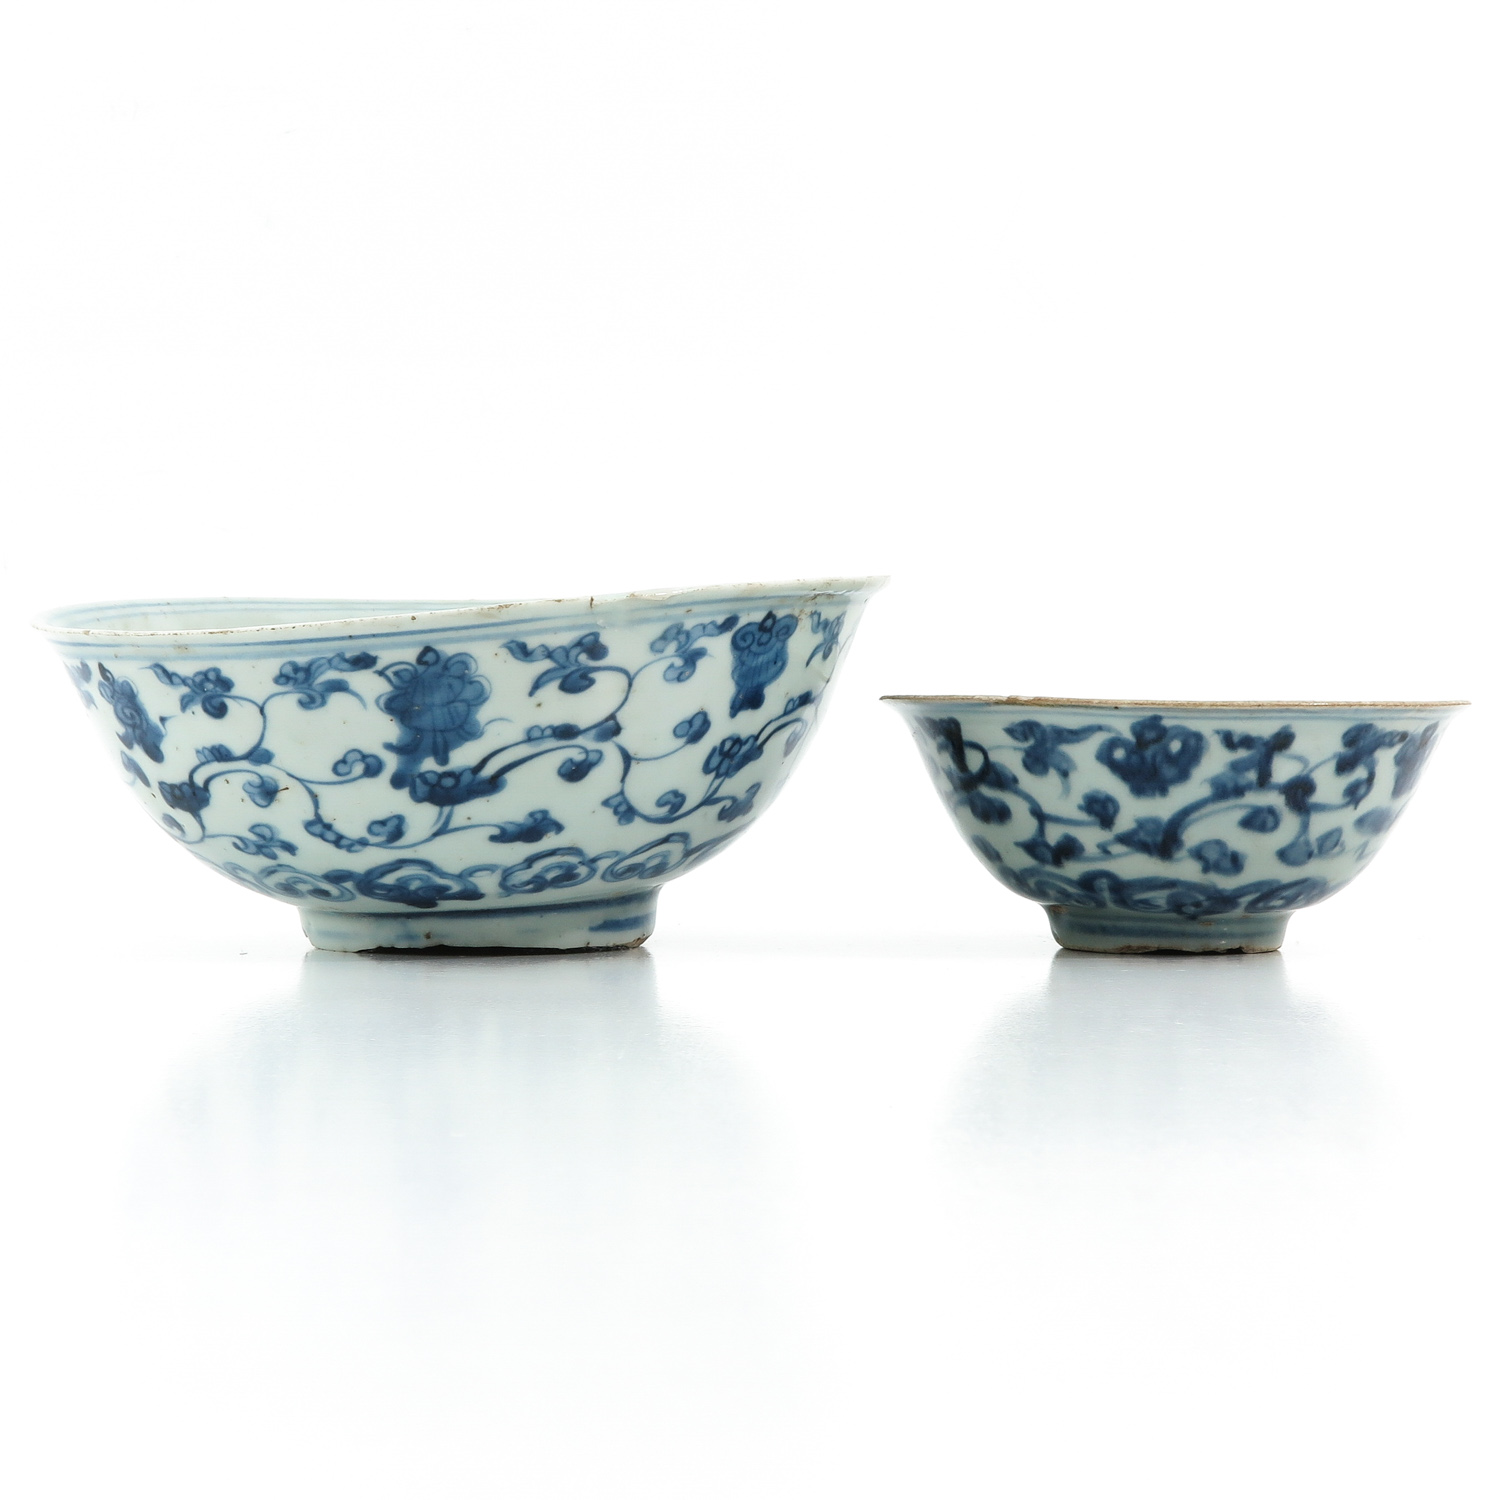 A Lot of 2 Blue and White Bowls - Image 4 of 10